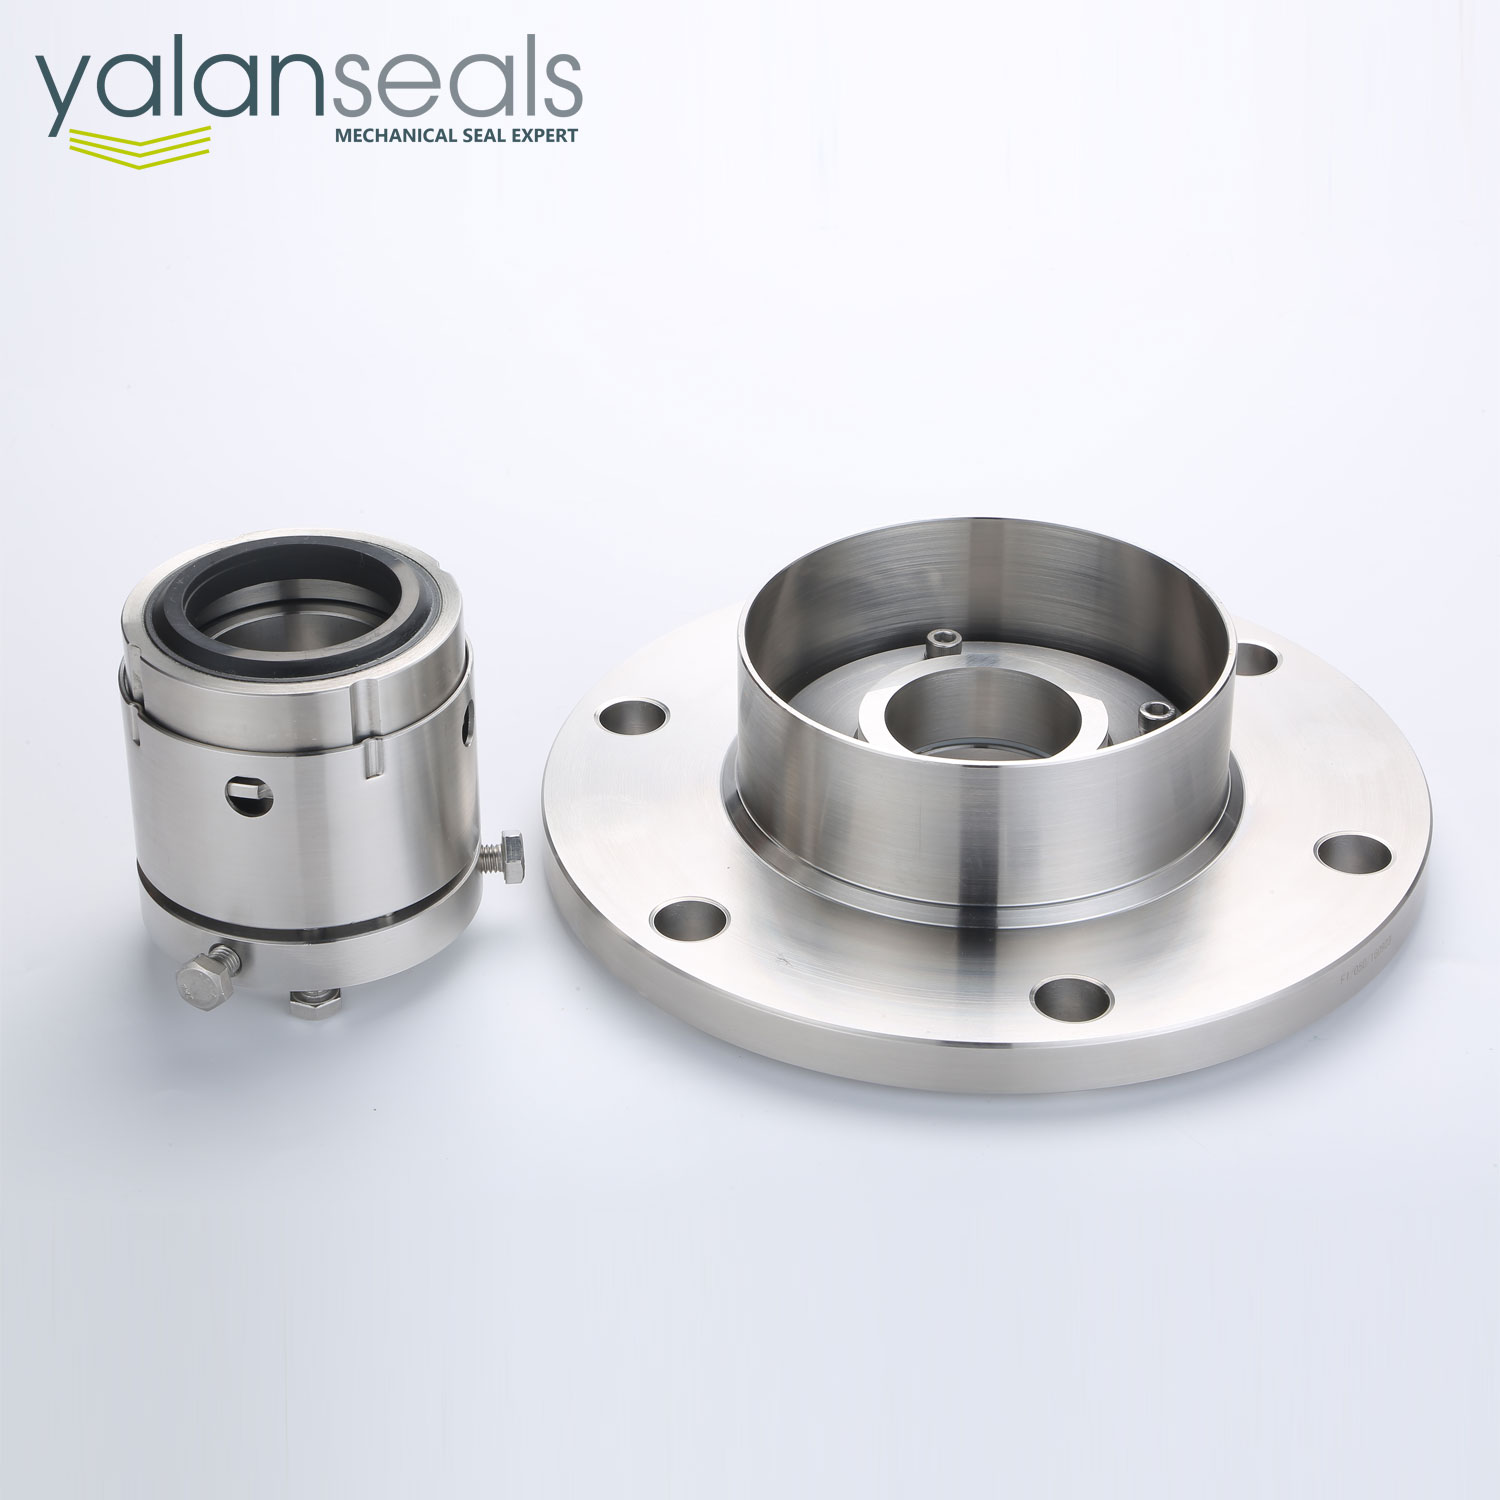 204B Mechanical Seal with Oil Basin